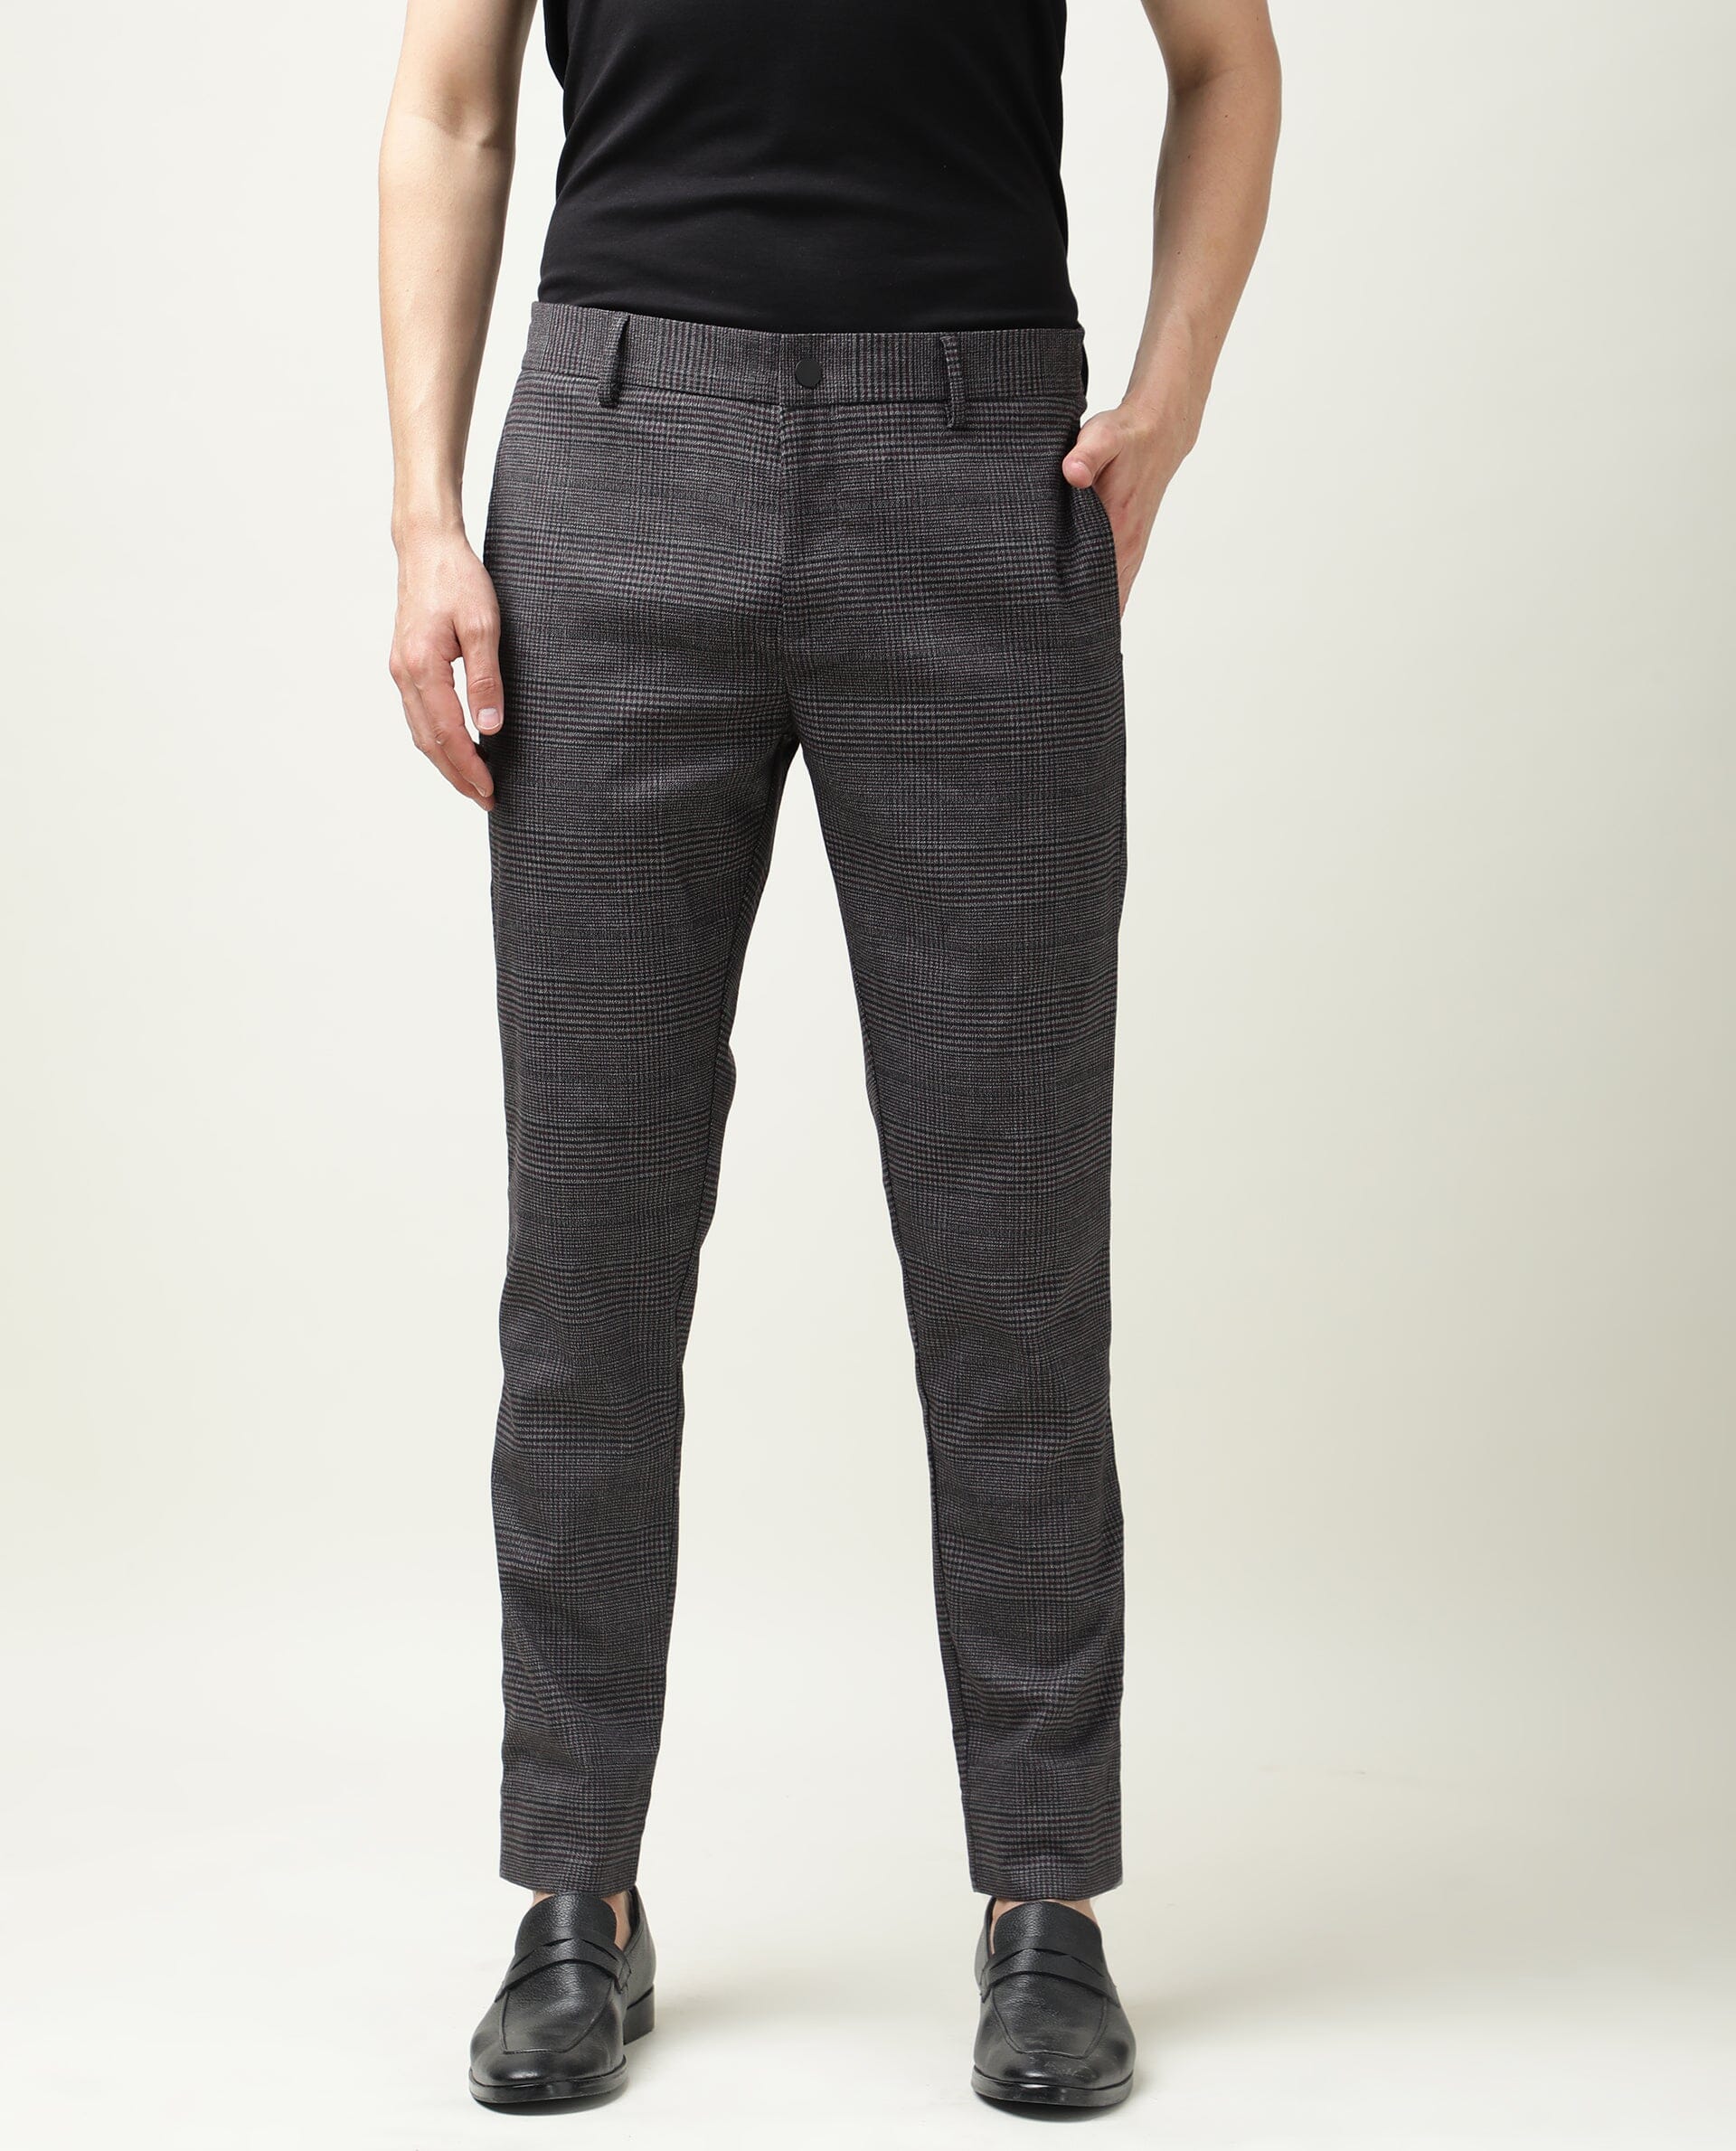 Jenson Grey Check Trousers  Available here at Hotspur1364